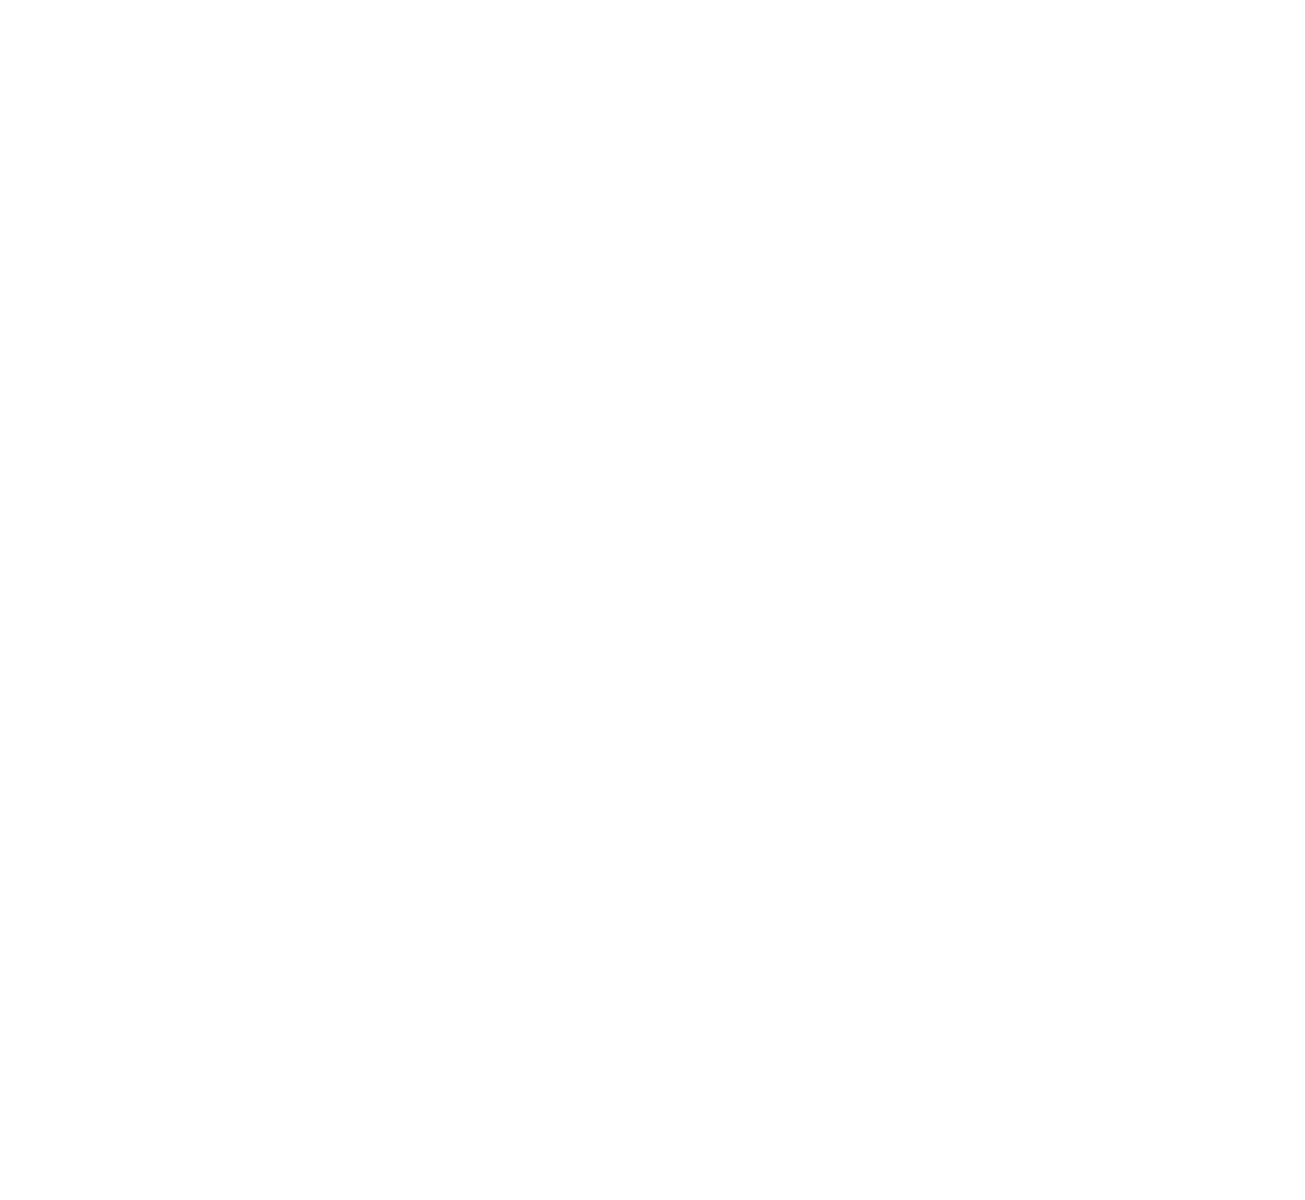 RecoveRE Holdings logo